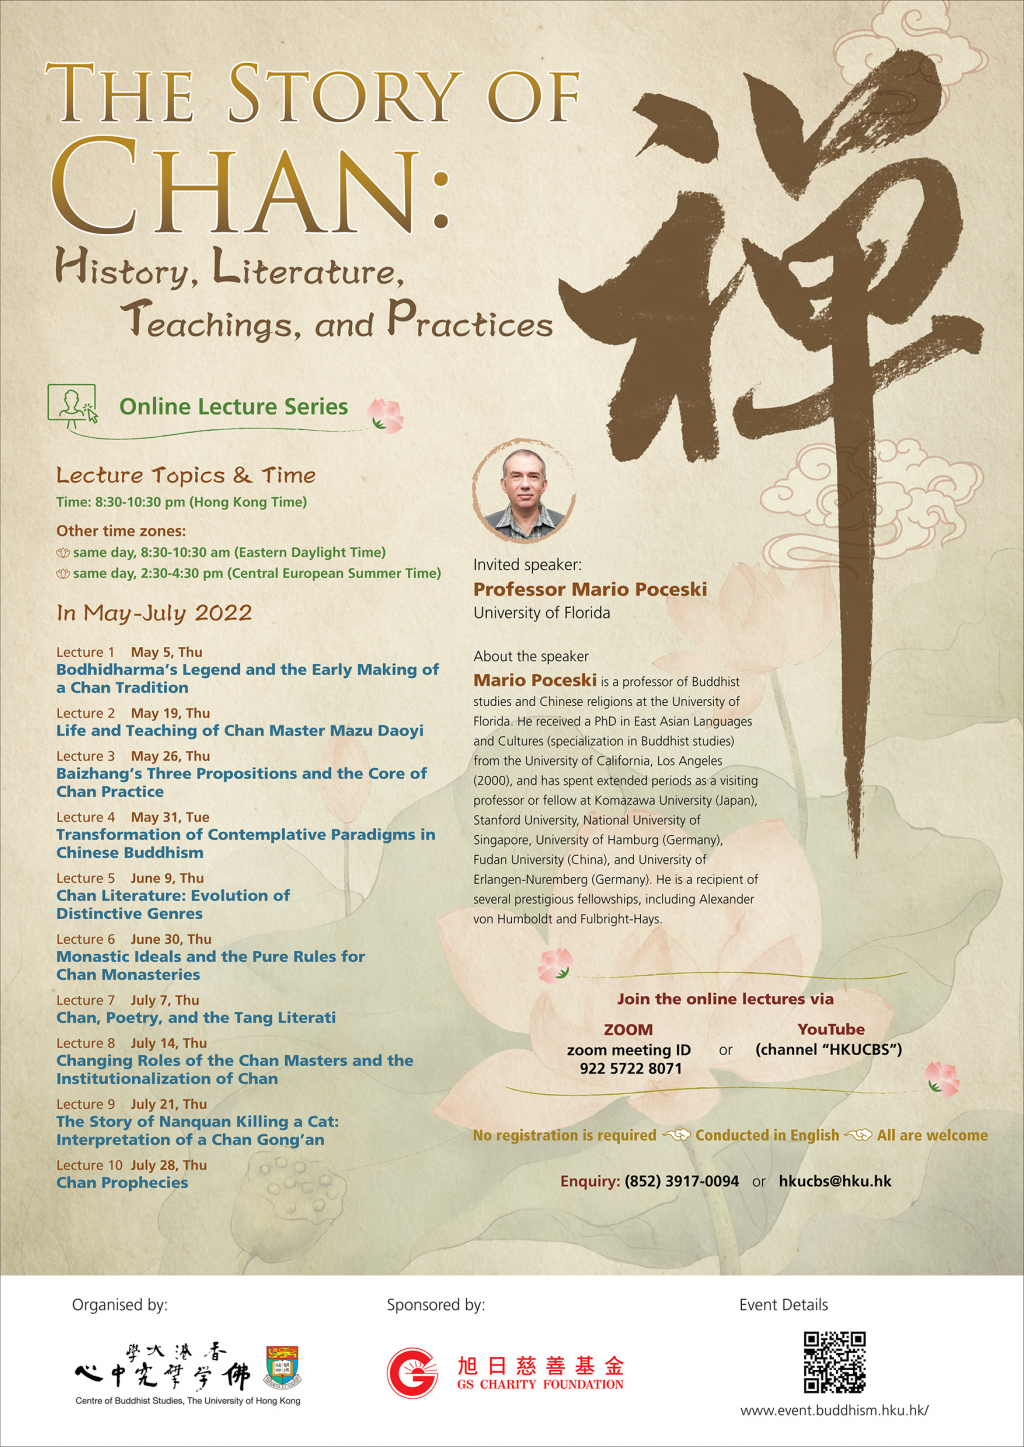 Online Lecture Series - The Story of Chan: History, Literature, Teachings, and Practices